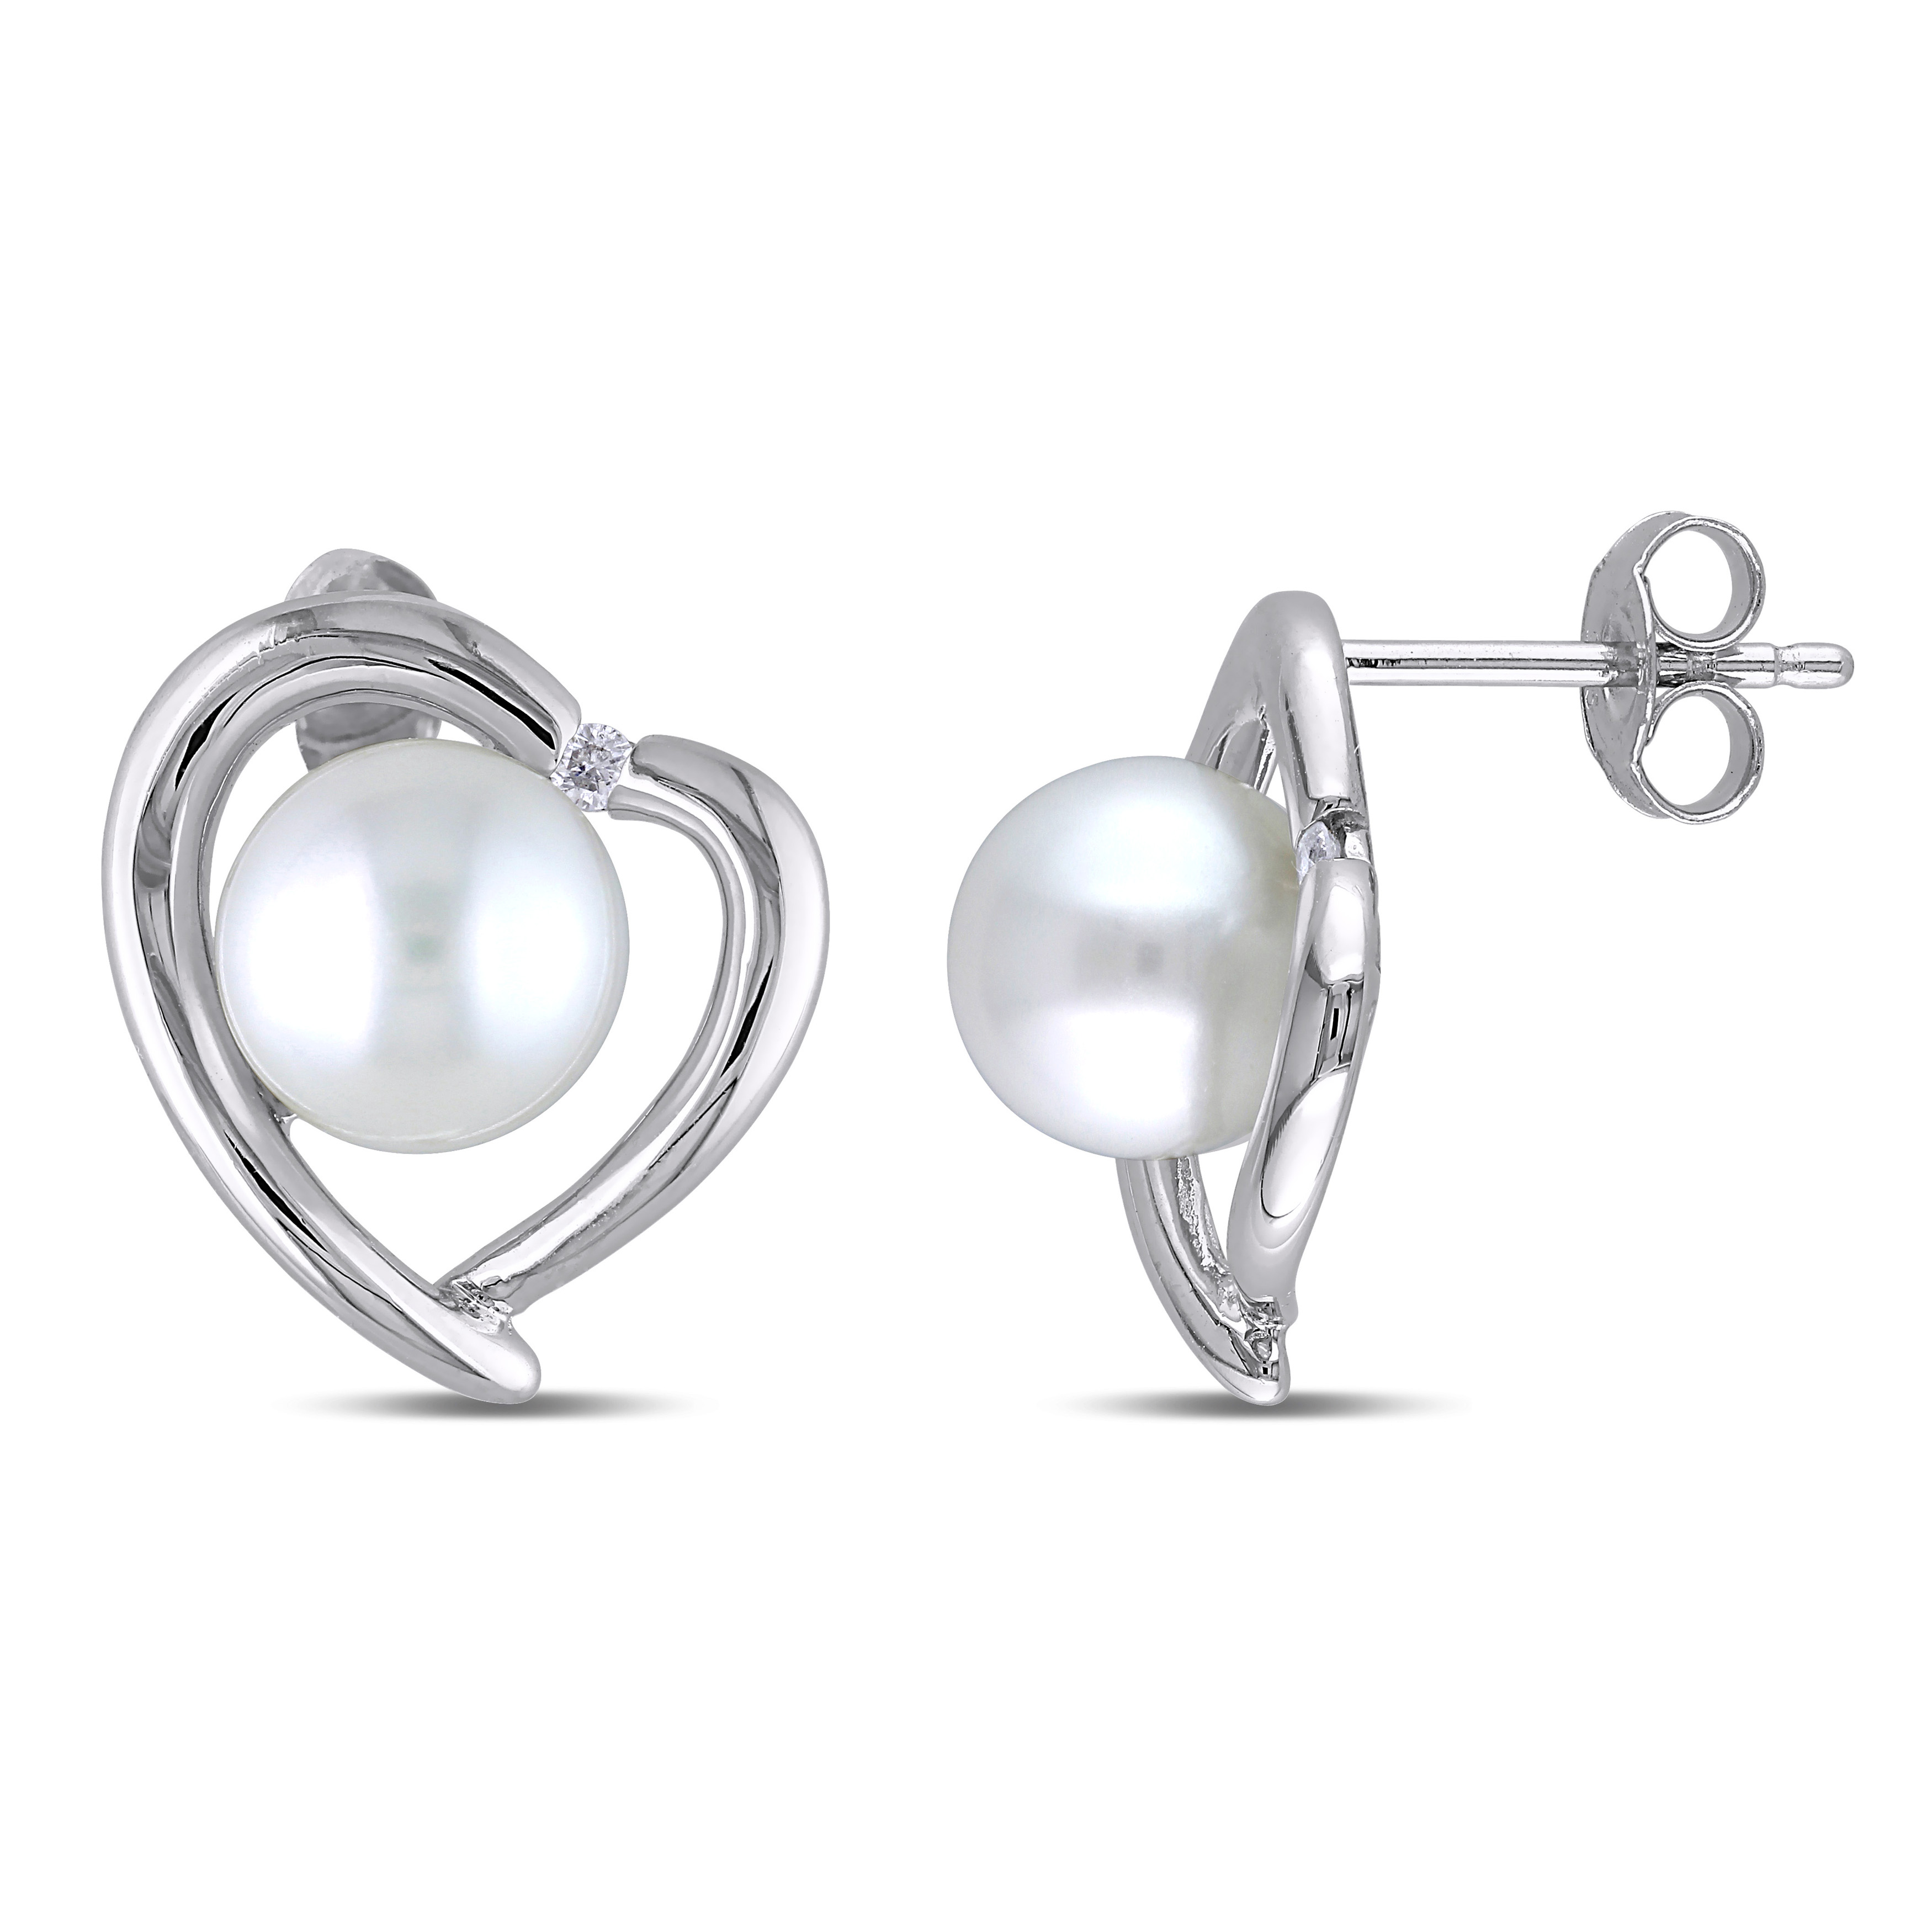 8 - 8.5 MM White Cultured Freshwater Pearl and Diamond Heart Stud Earrings in Sterling Silver